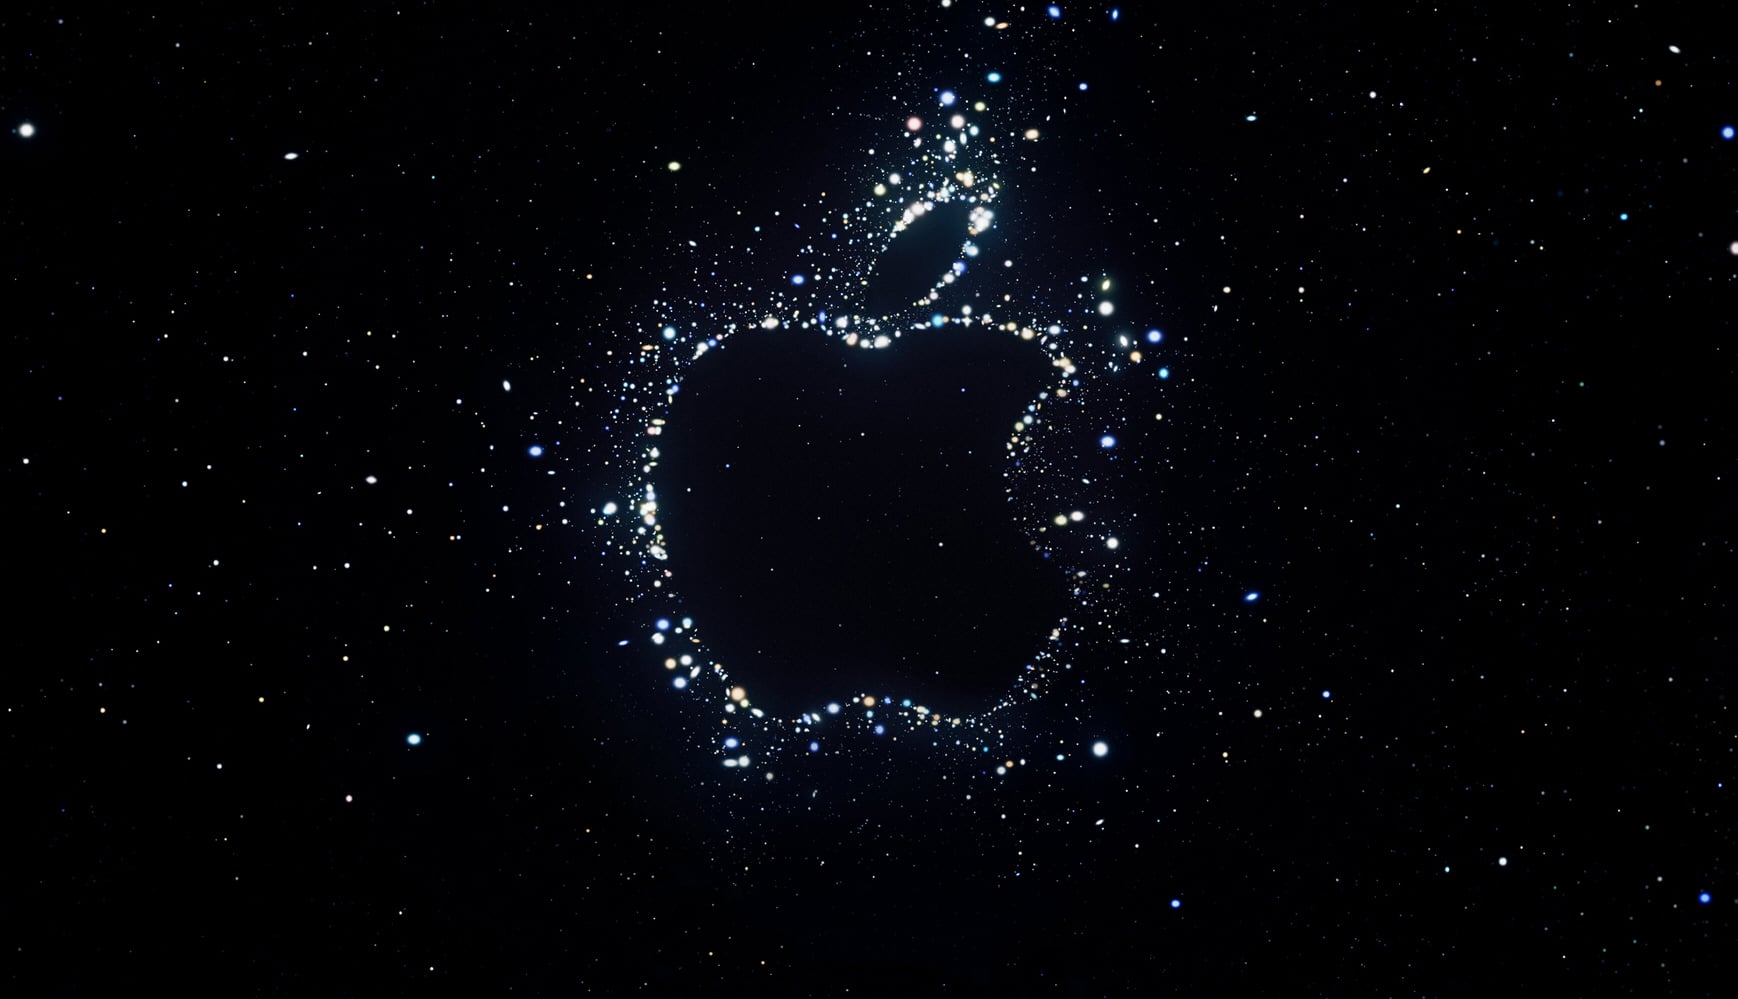 Watch Apple reveal the new iPhone 14 at today's 'Far Out' event, here